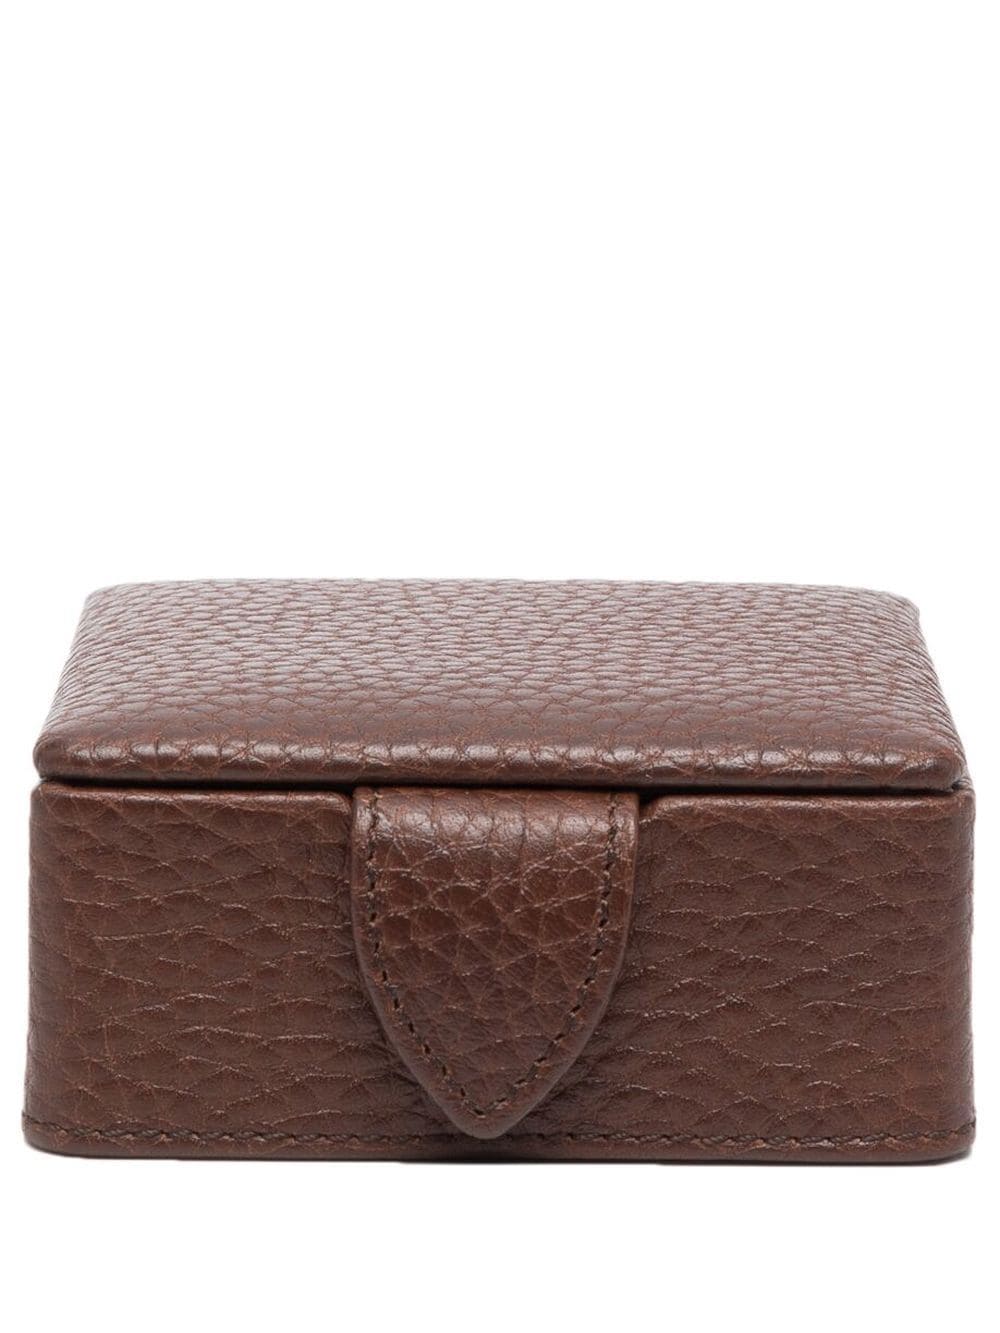 Aspinal Of London leather stud box - Brown von Aspinal Of London